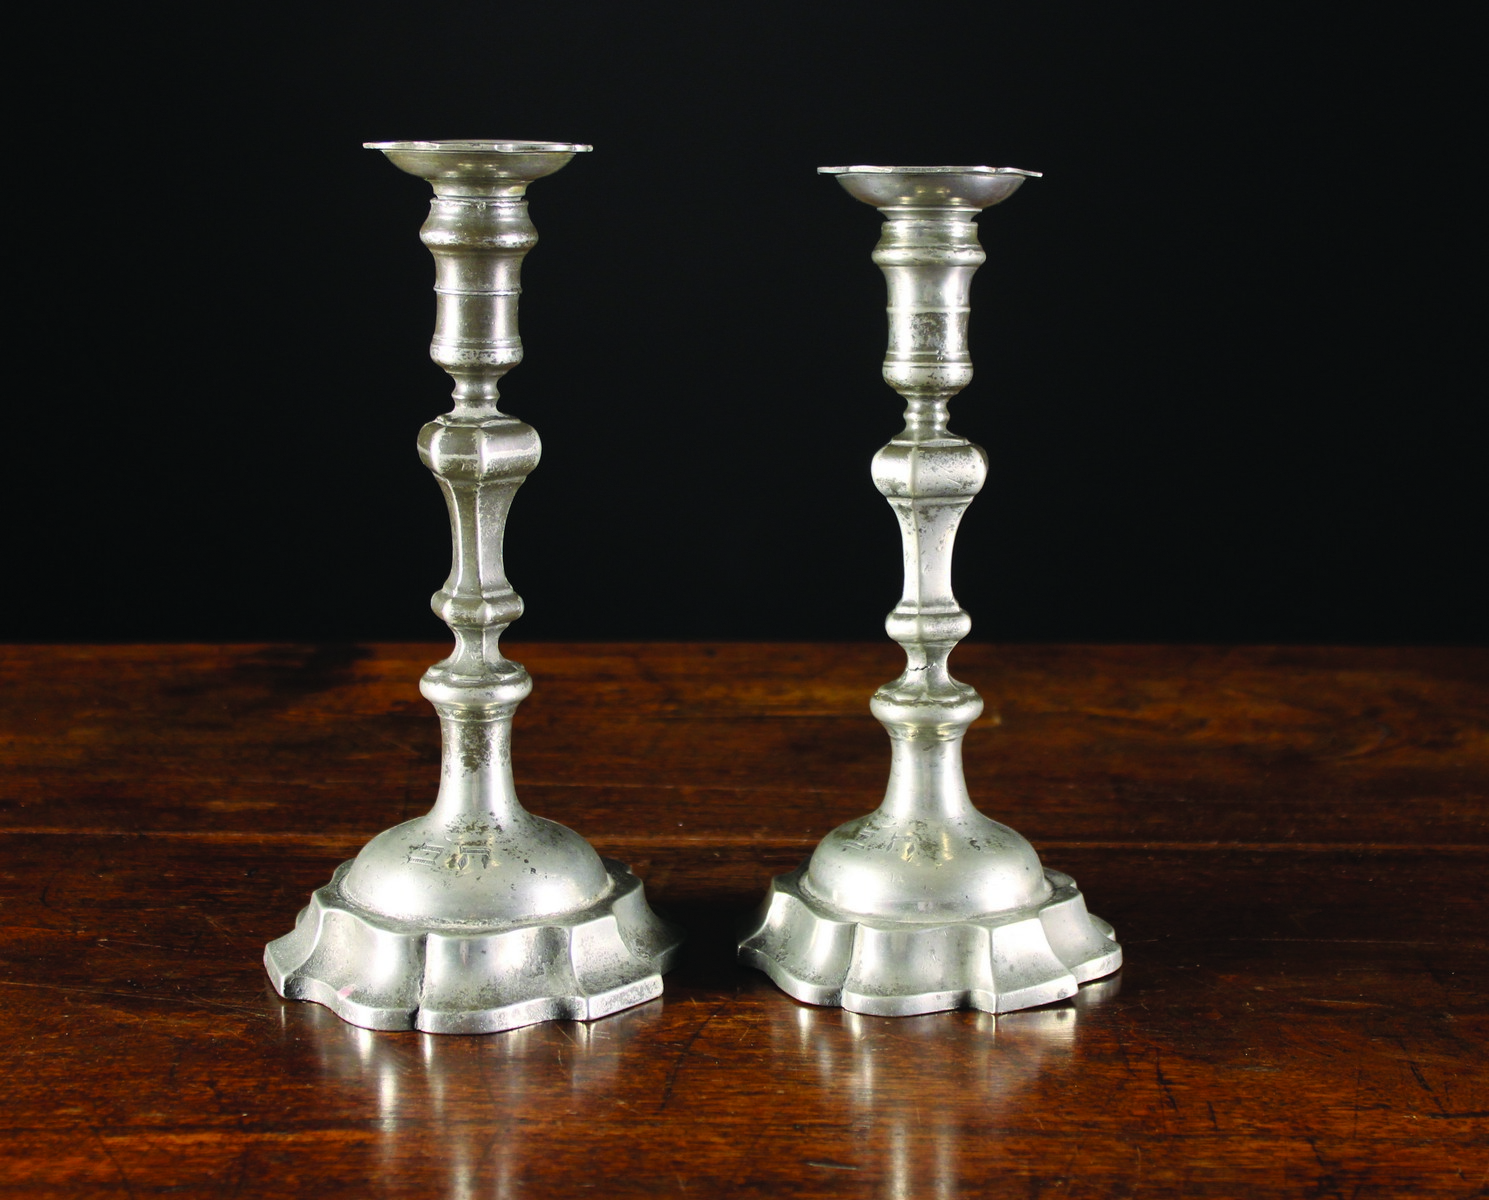 A Pair of 18th Century Dutch Pewter Candlesticks by Nicholas Kraan of Amsterdam,